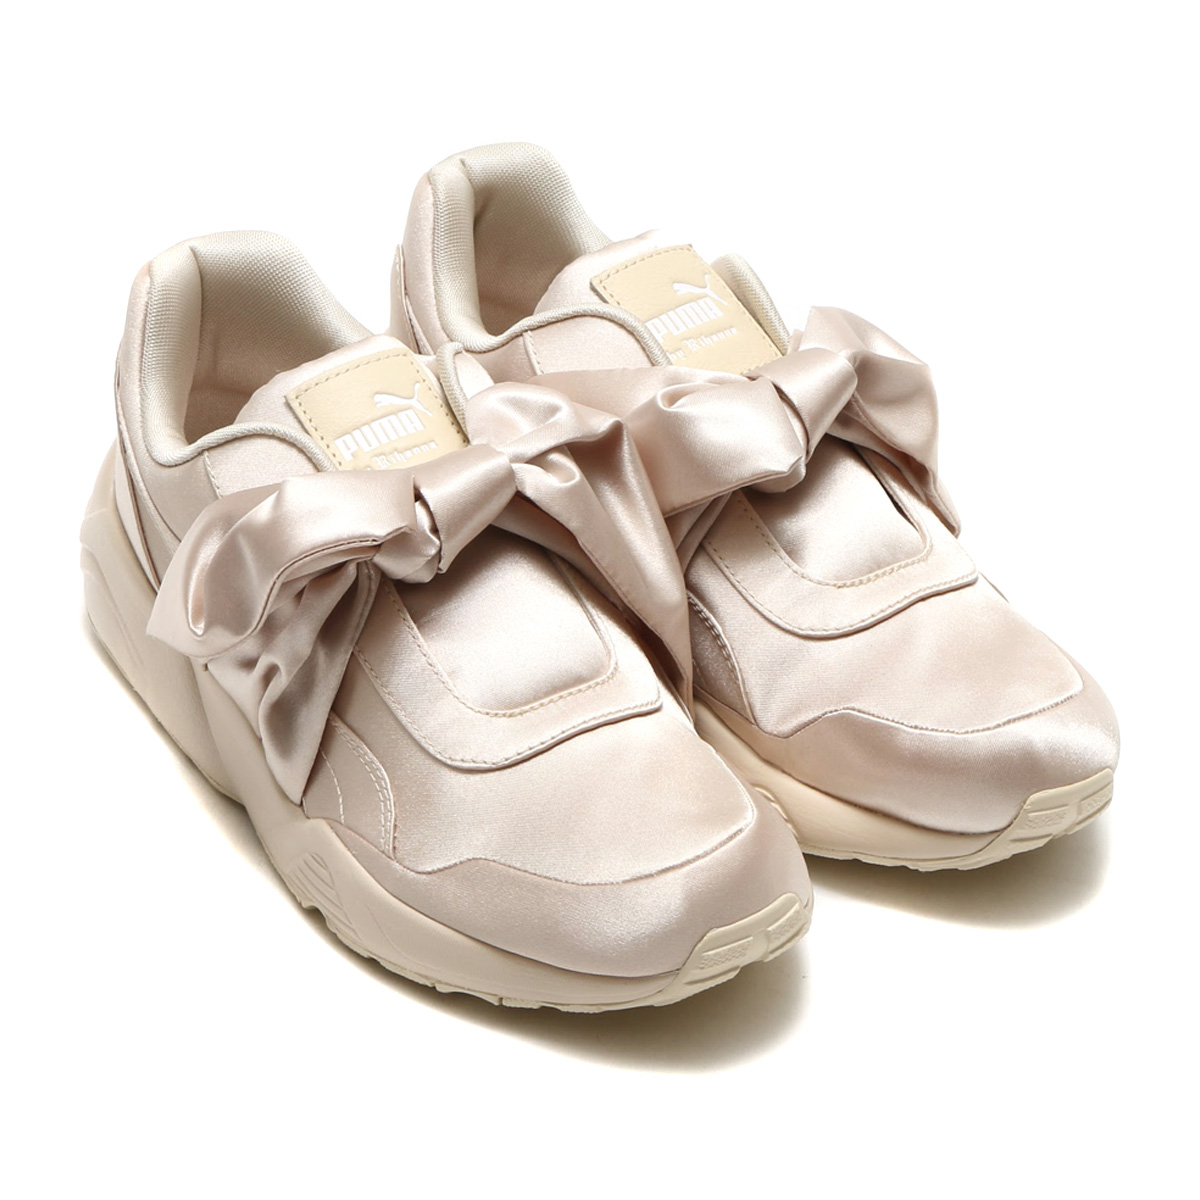 puma pink bow sneakers